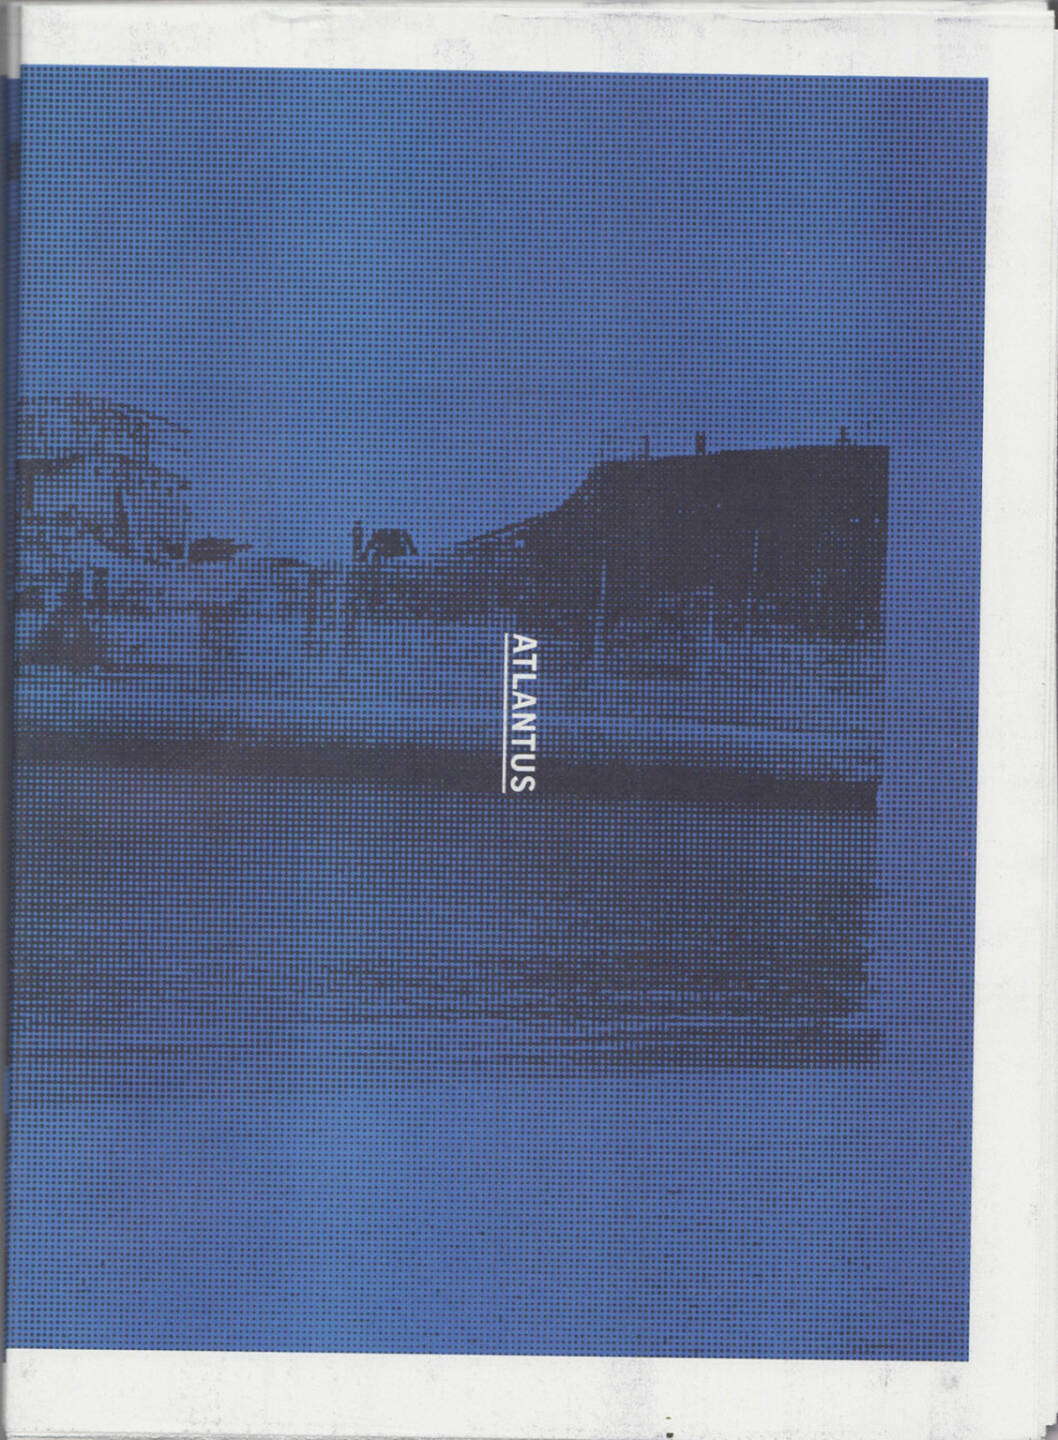 Martin Toft - Atlantus, Self published 2015, Cover - http://josefchladek.com/book/martin_toft_-_atlantus